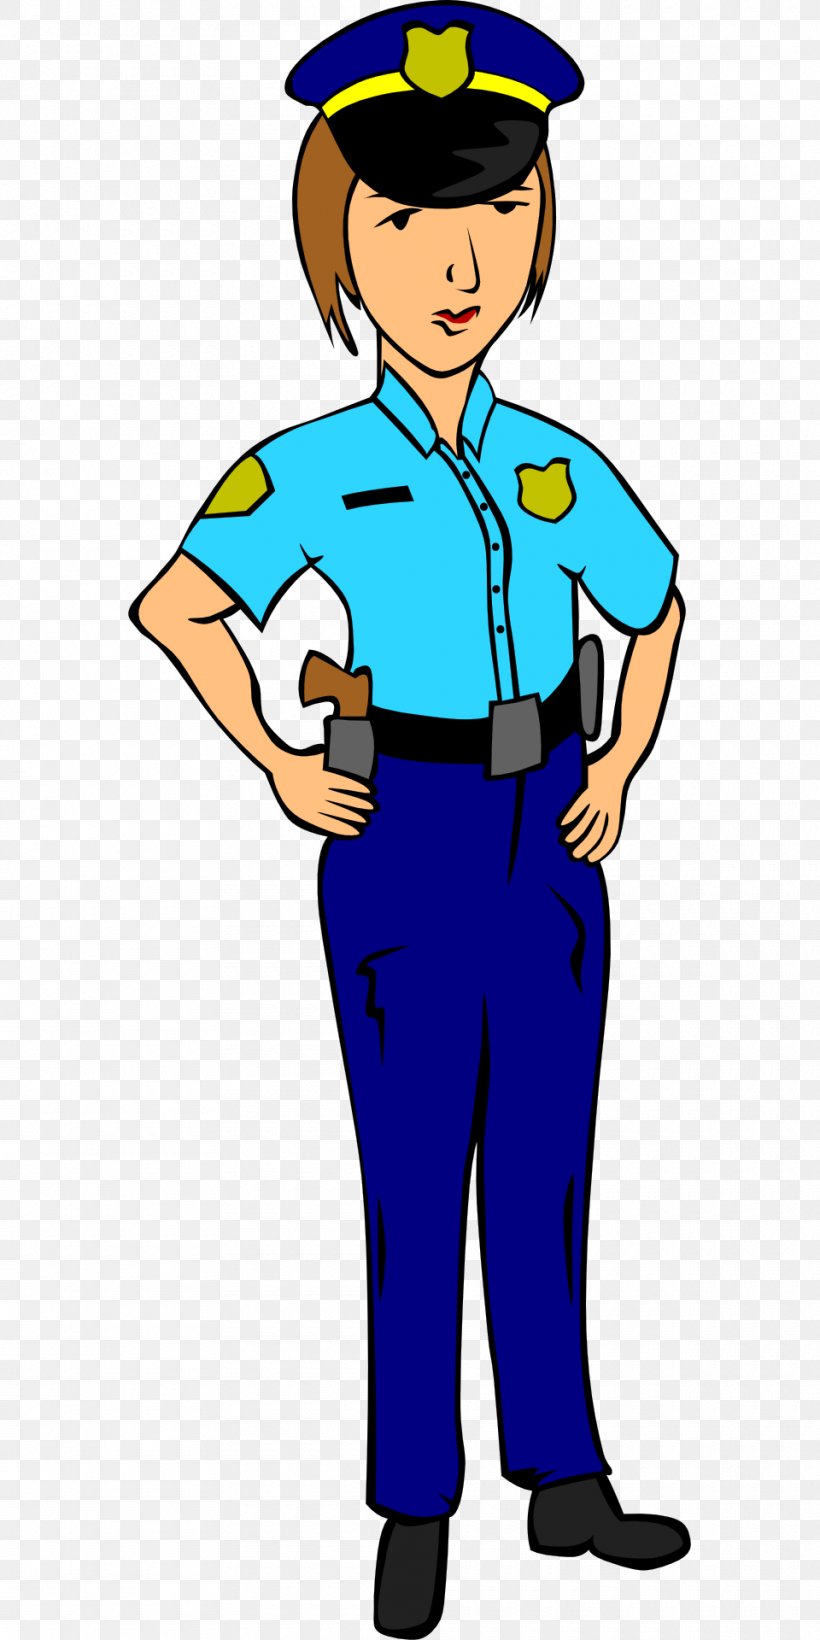 Police Officer Woman Clip Art, PNG, 960x1920px, Police Officer, Baton, Crime, Female, Fictional Character Download Free